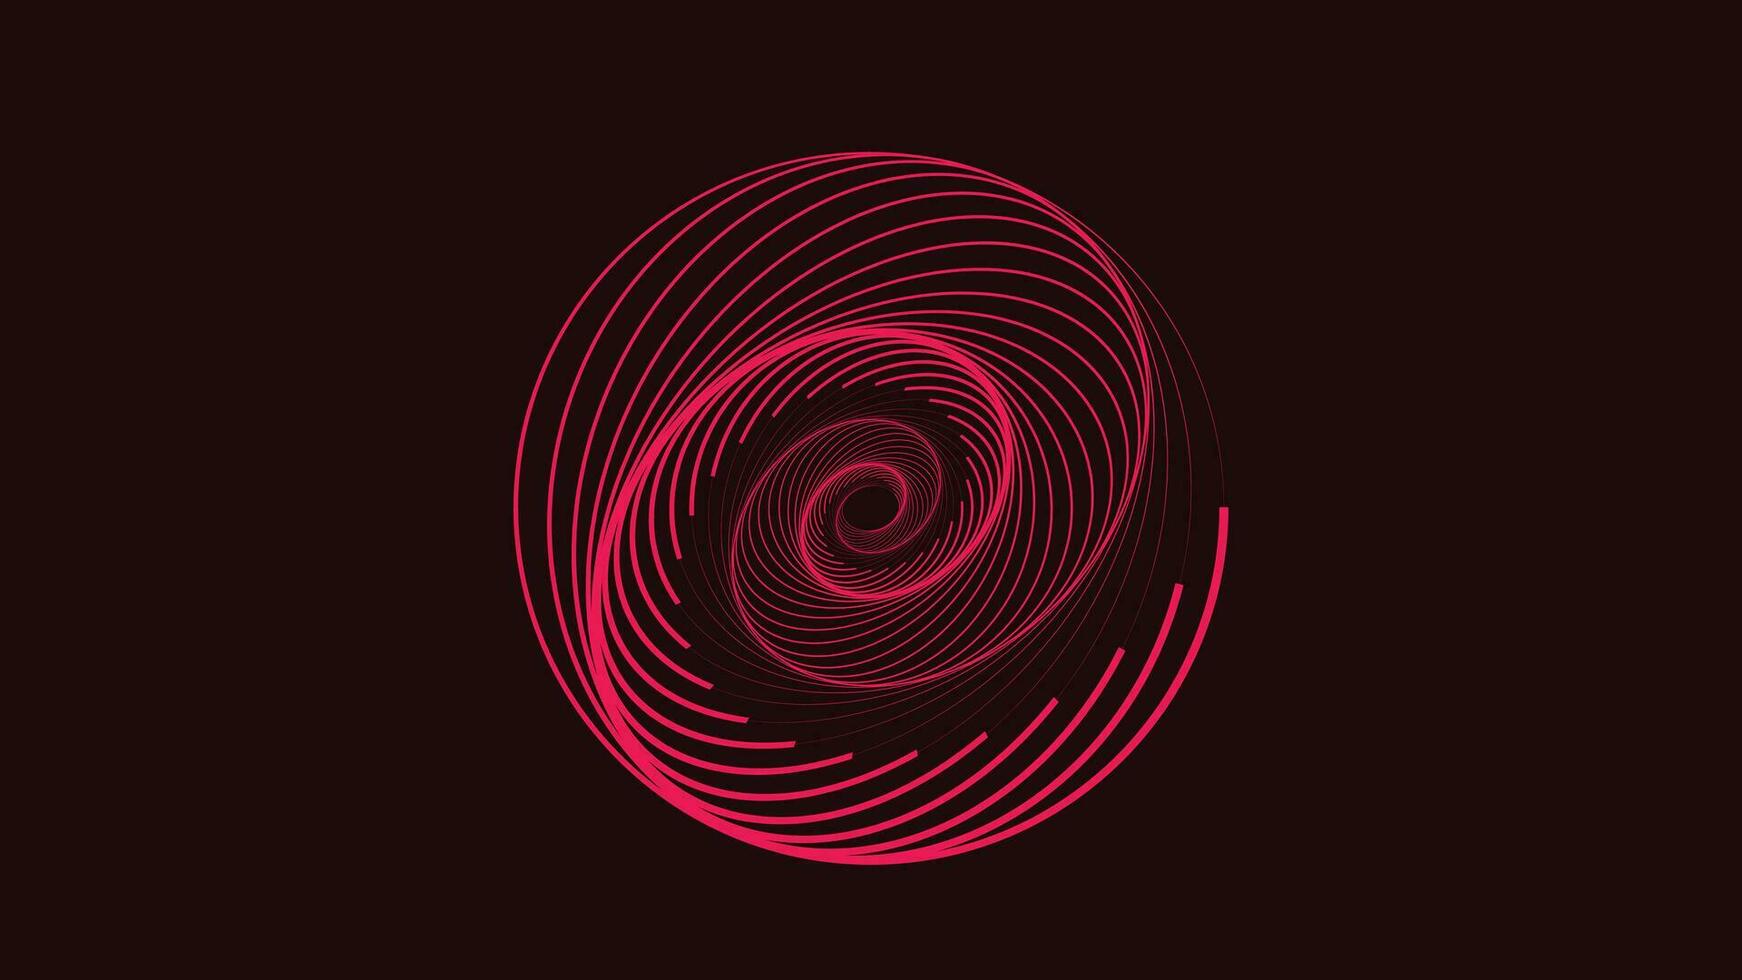 Abstract spiral round logo background. This spinning galaxy type logo can be used as a banner or project elements. vector